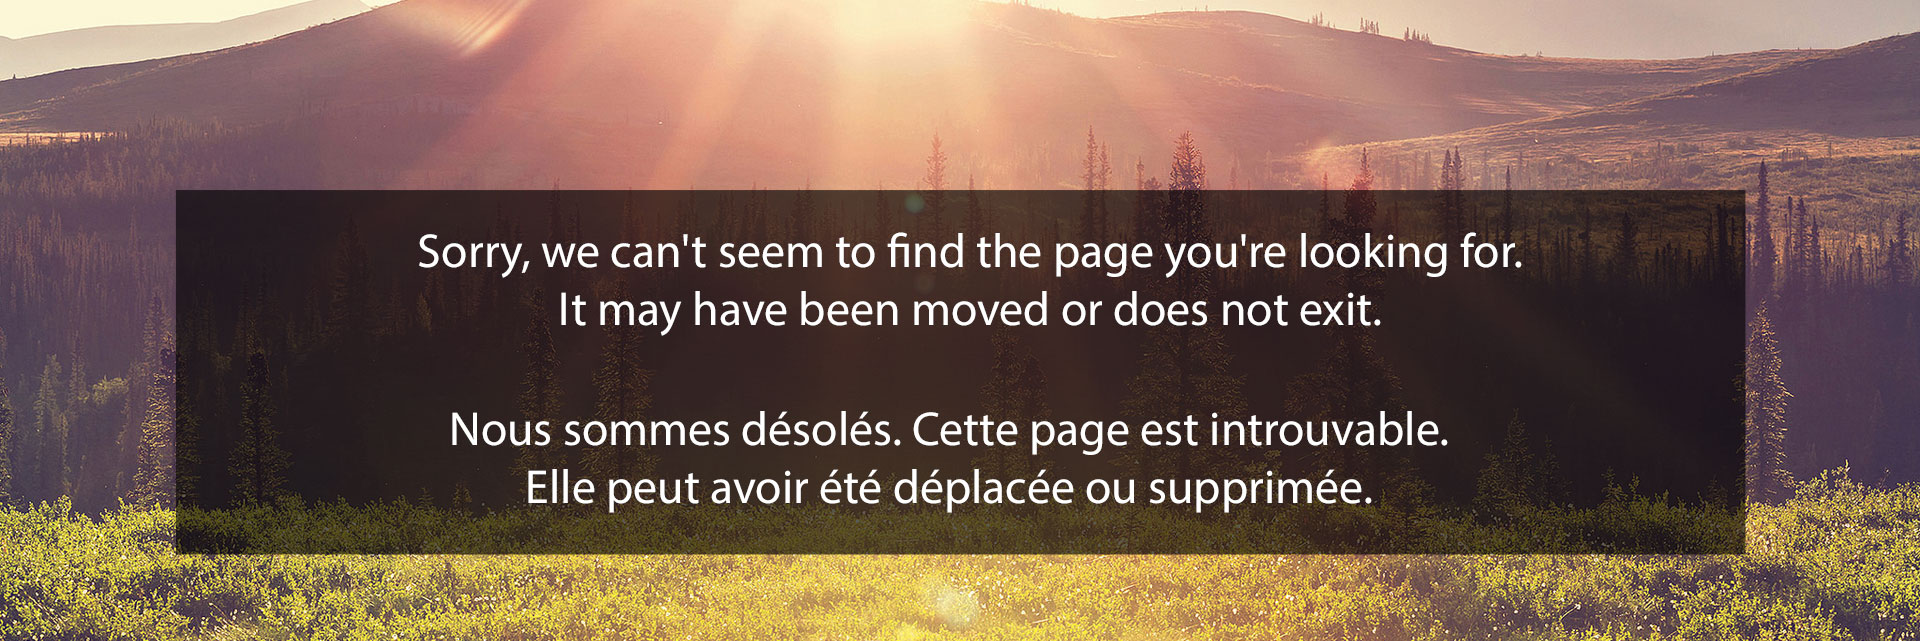 Sorry, we can't seem to find the page you're looking for. It may have been moved or does not exit.